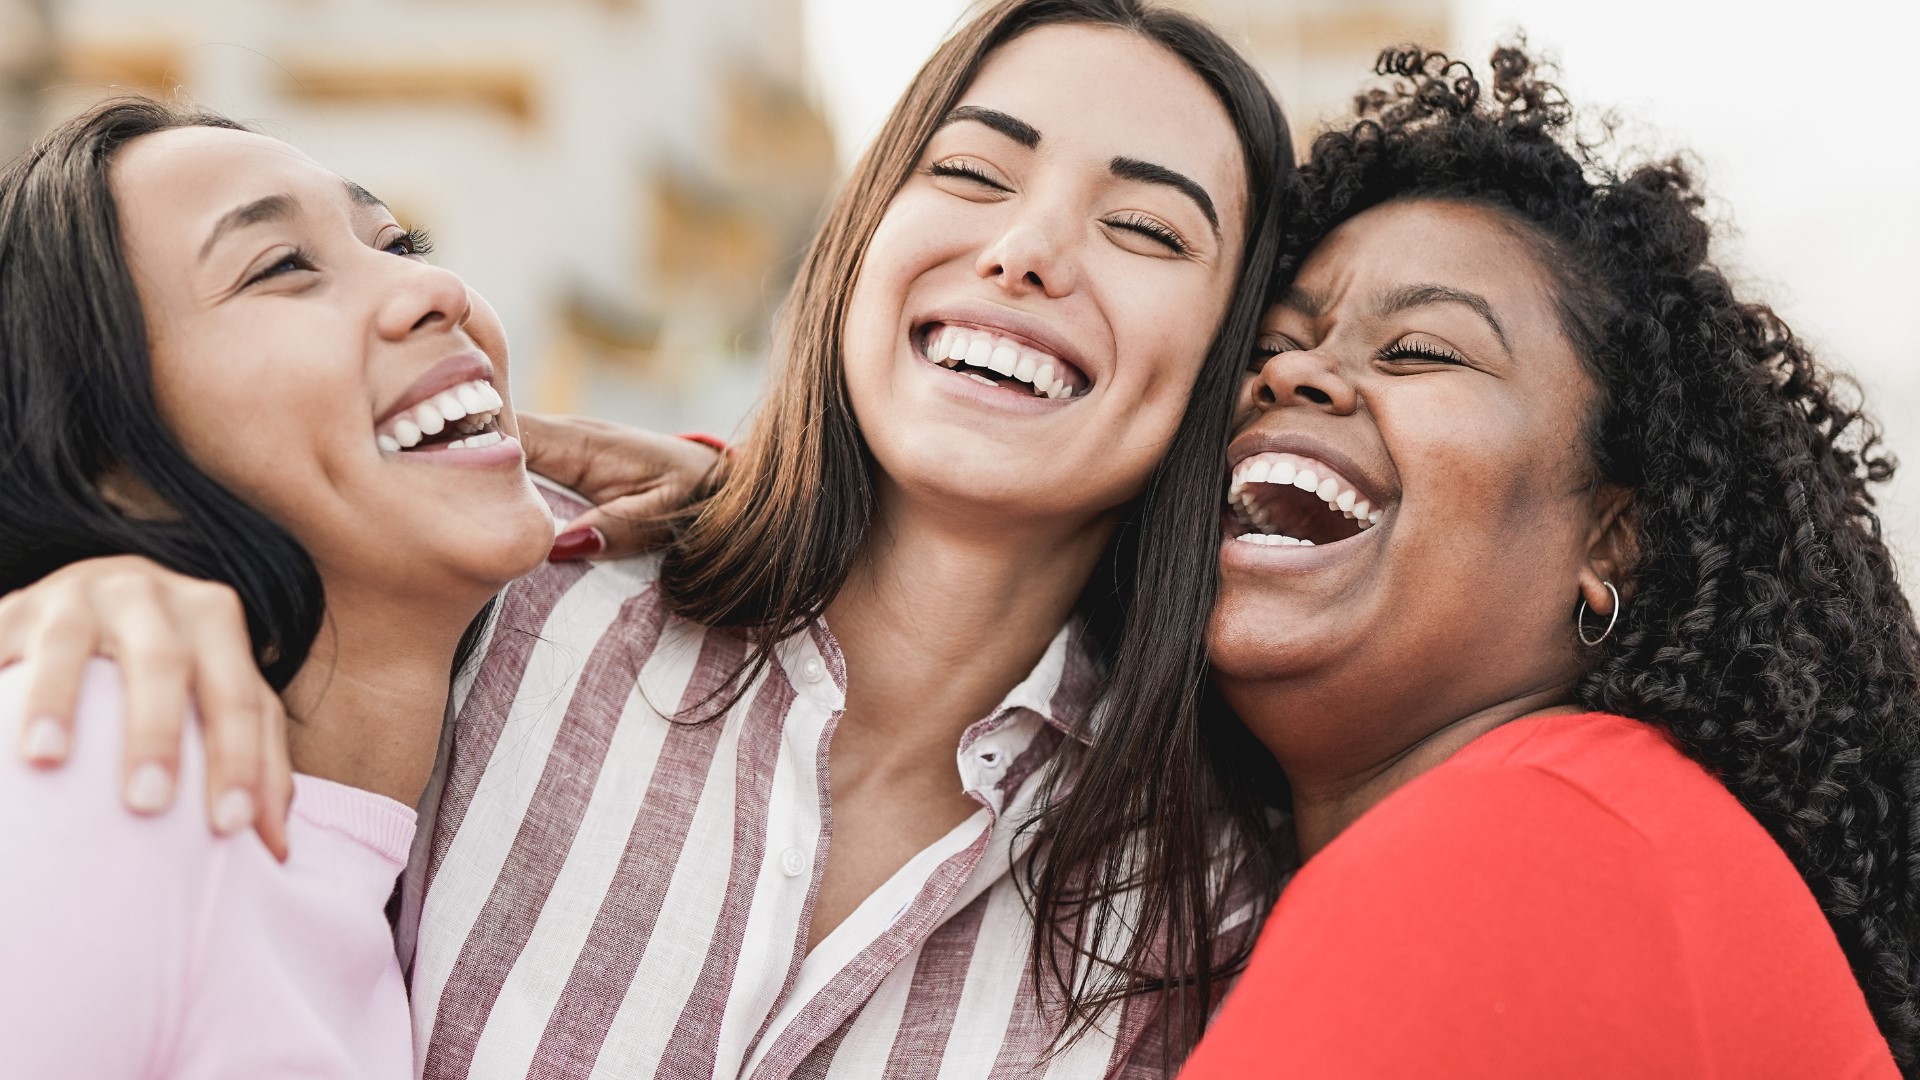 We all enjoy a good laugh whether it's a giggle, chuckle, cackle, or a deep belly laugh. However, did you know that laughter can be good for your health?